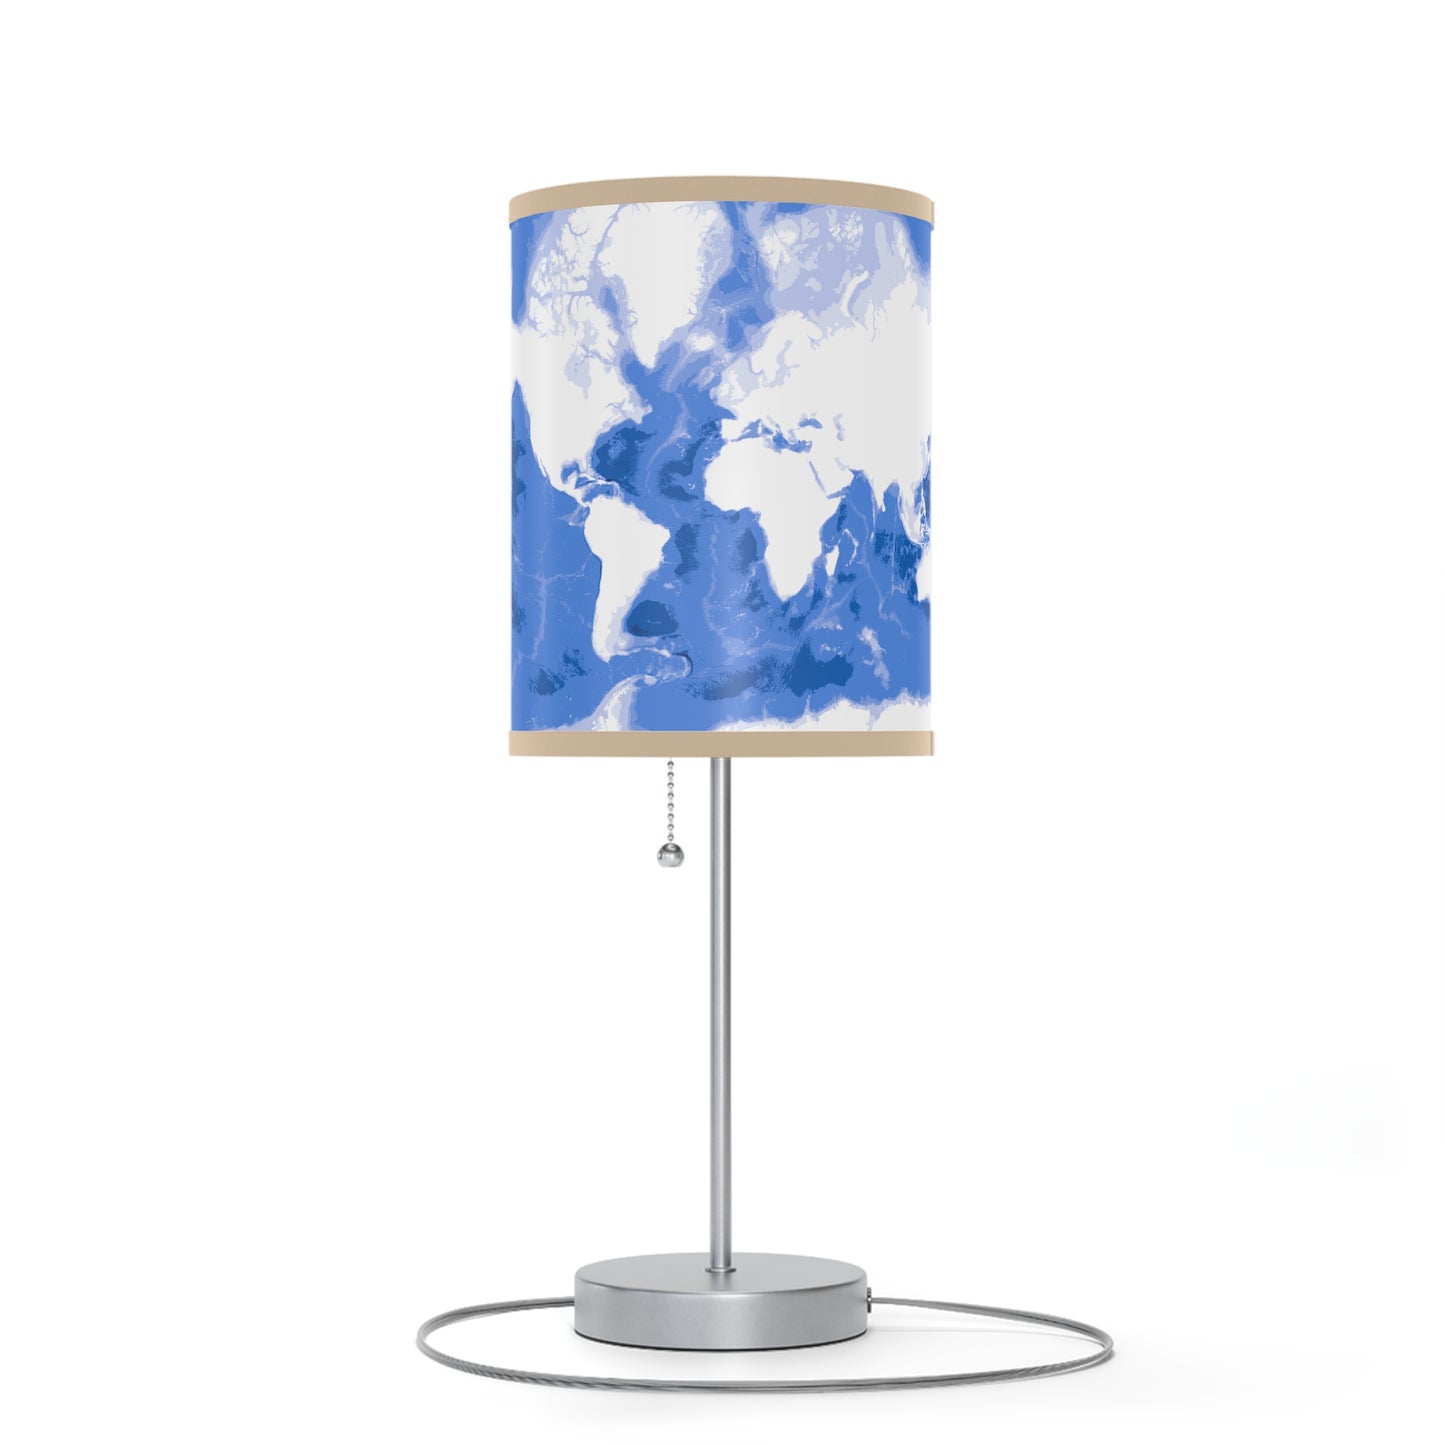 World map Lamp on a Stand, US|CA plug